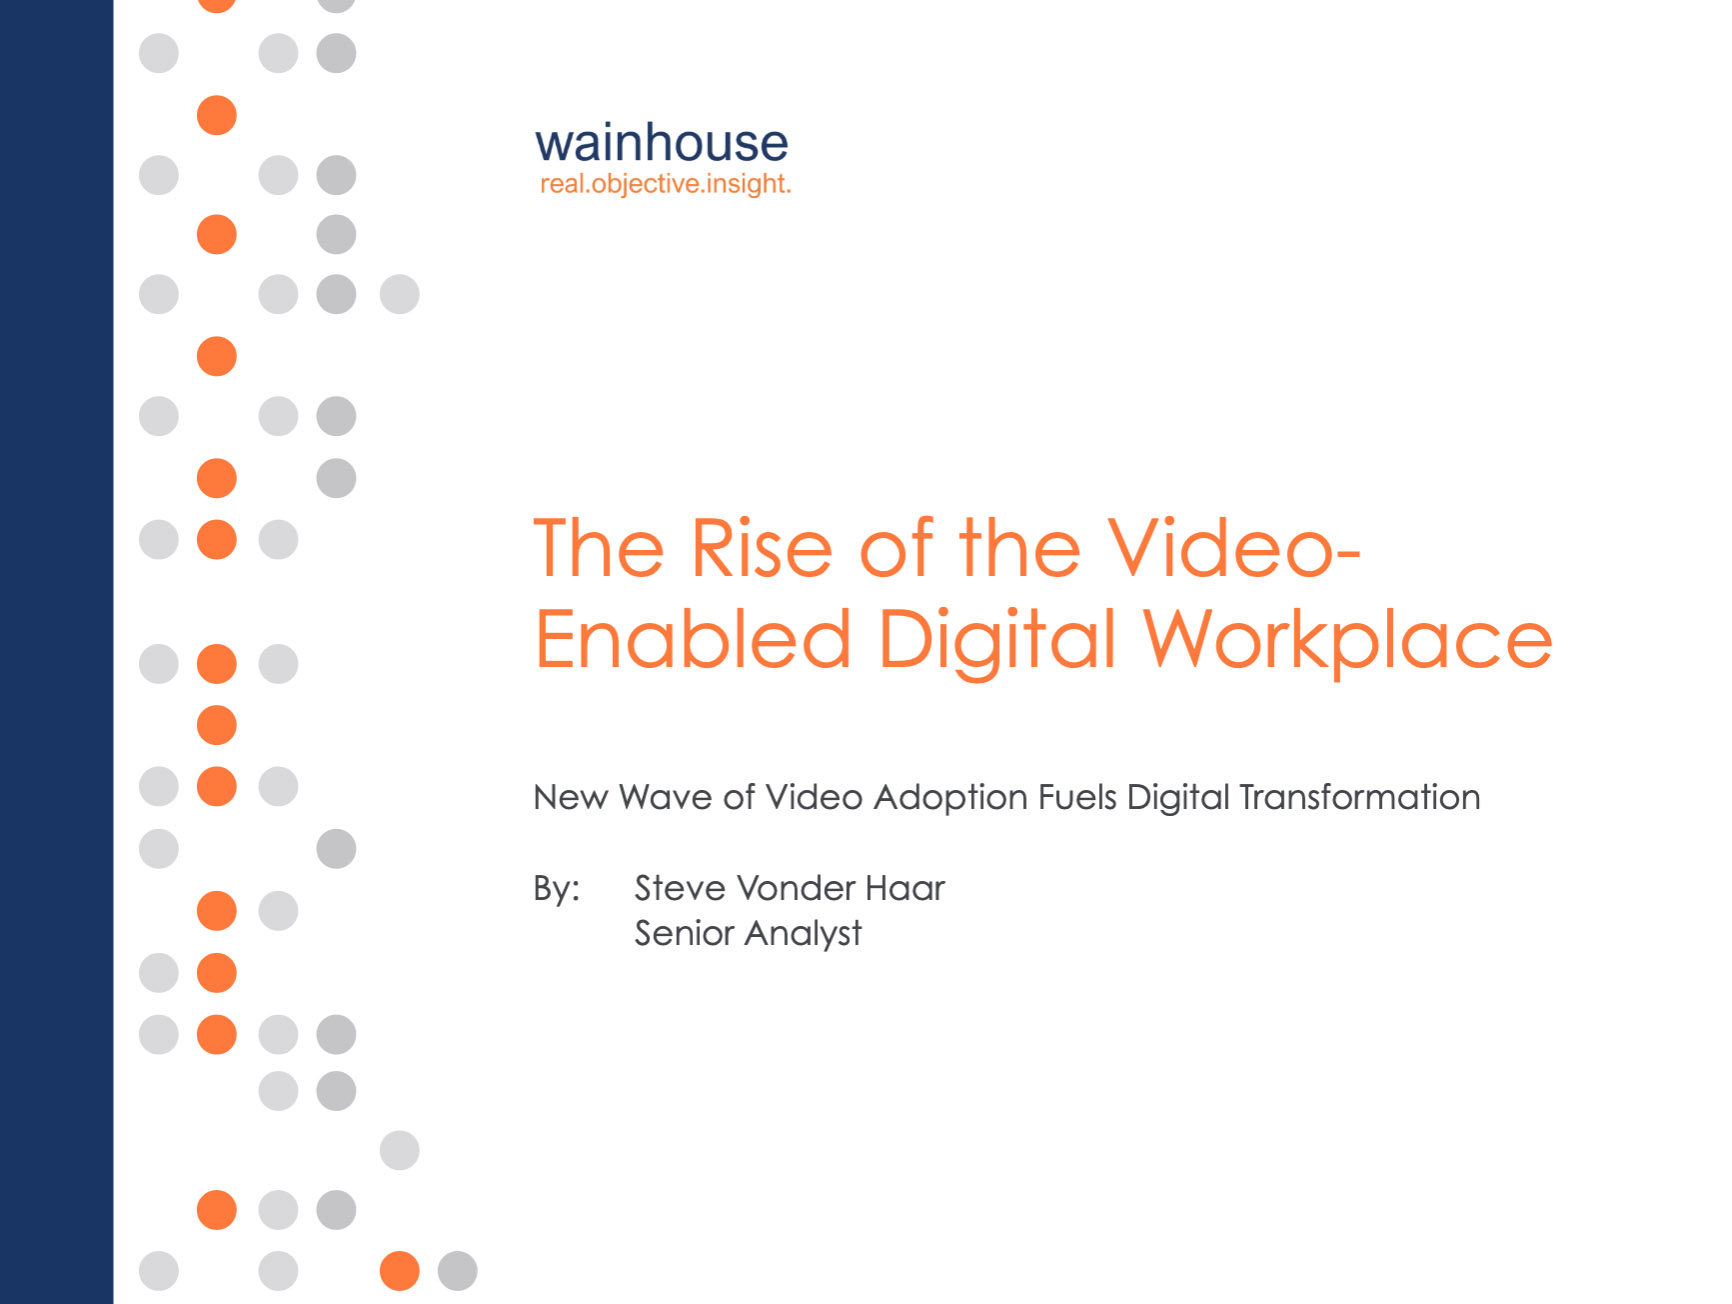 screenshot of the "Rise of the Video-Enabled Digital Workplace" whitepaper